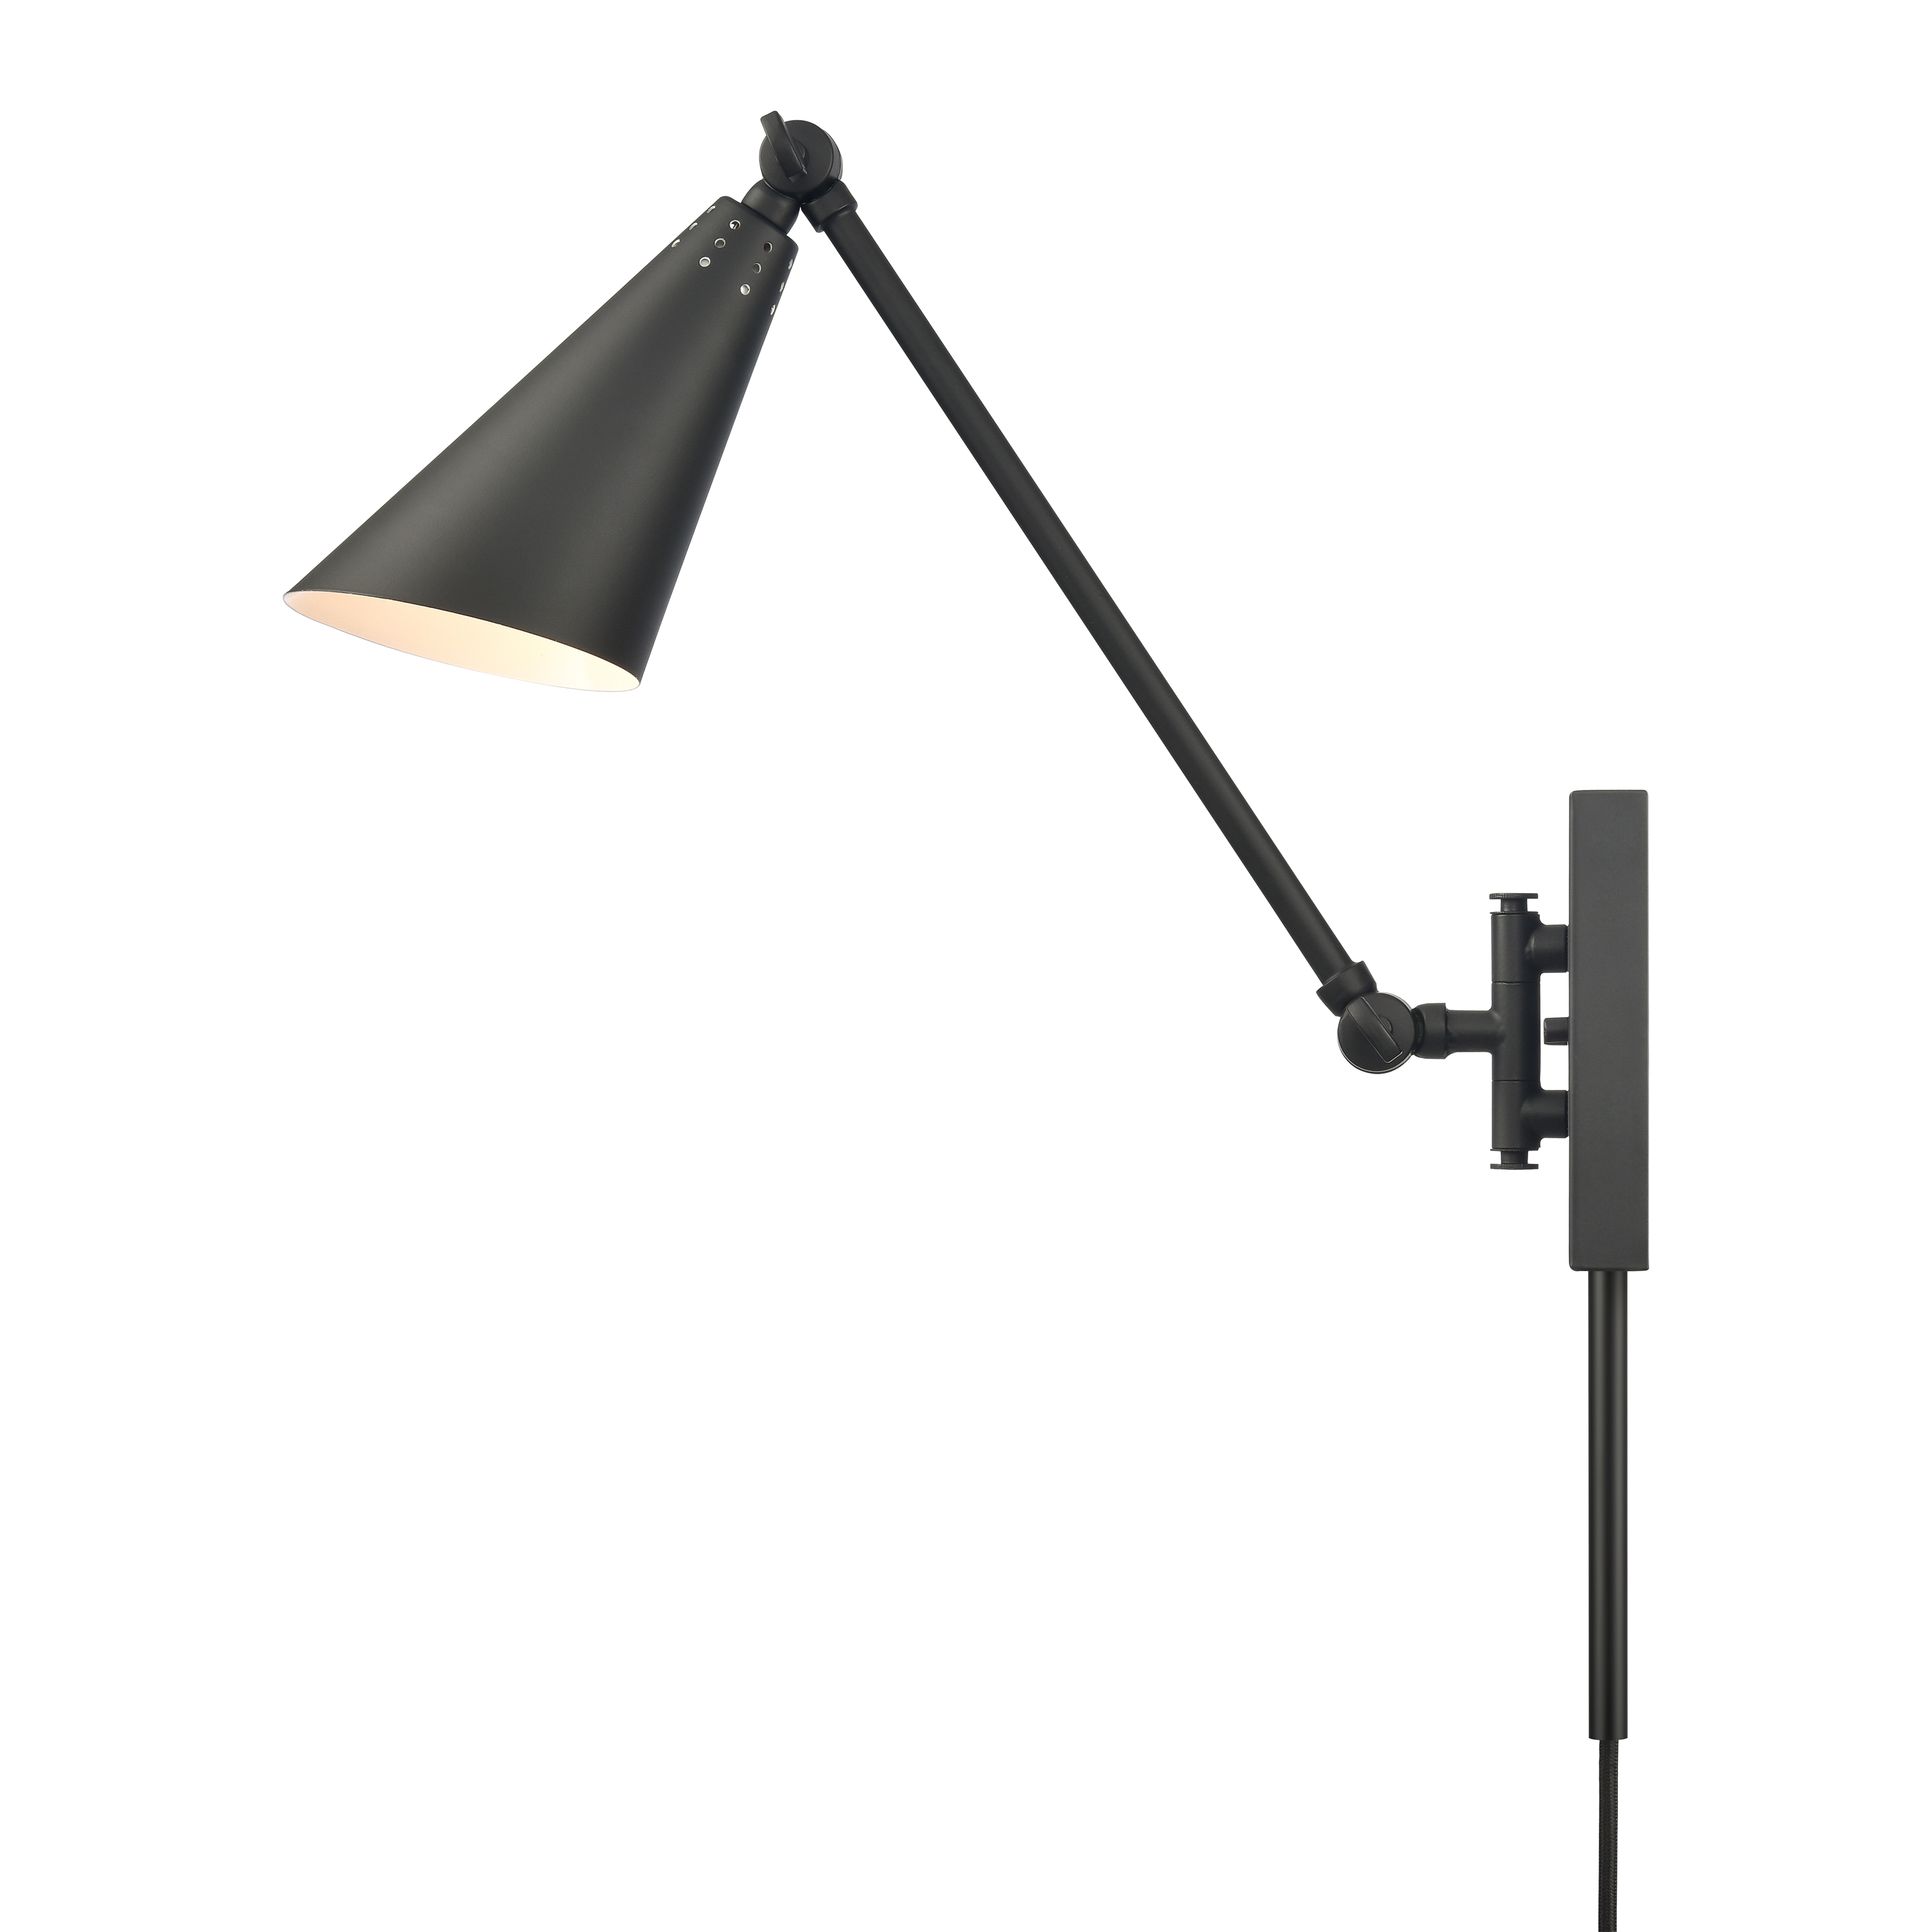 Whitmire 10.5'' High 1-Light Plug-In/Hardwire Sconce - Matte Black - Image 3